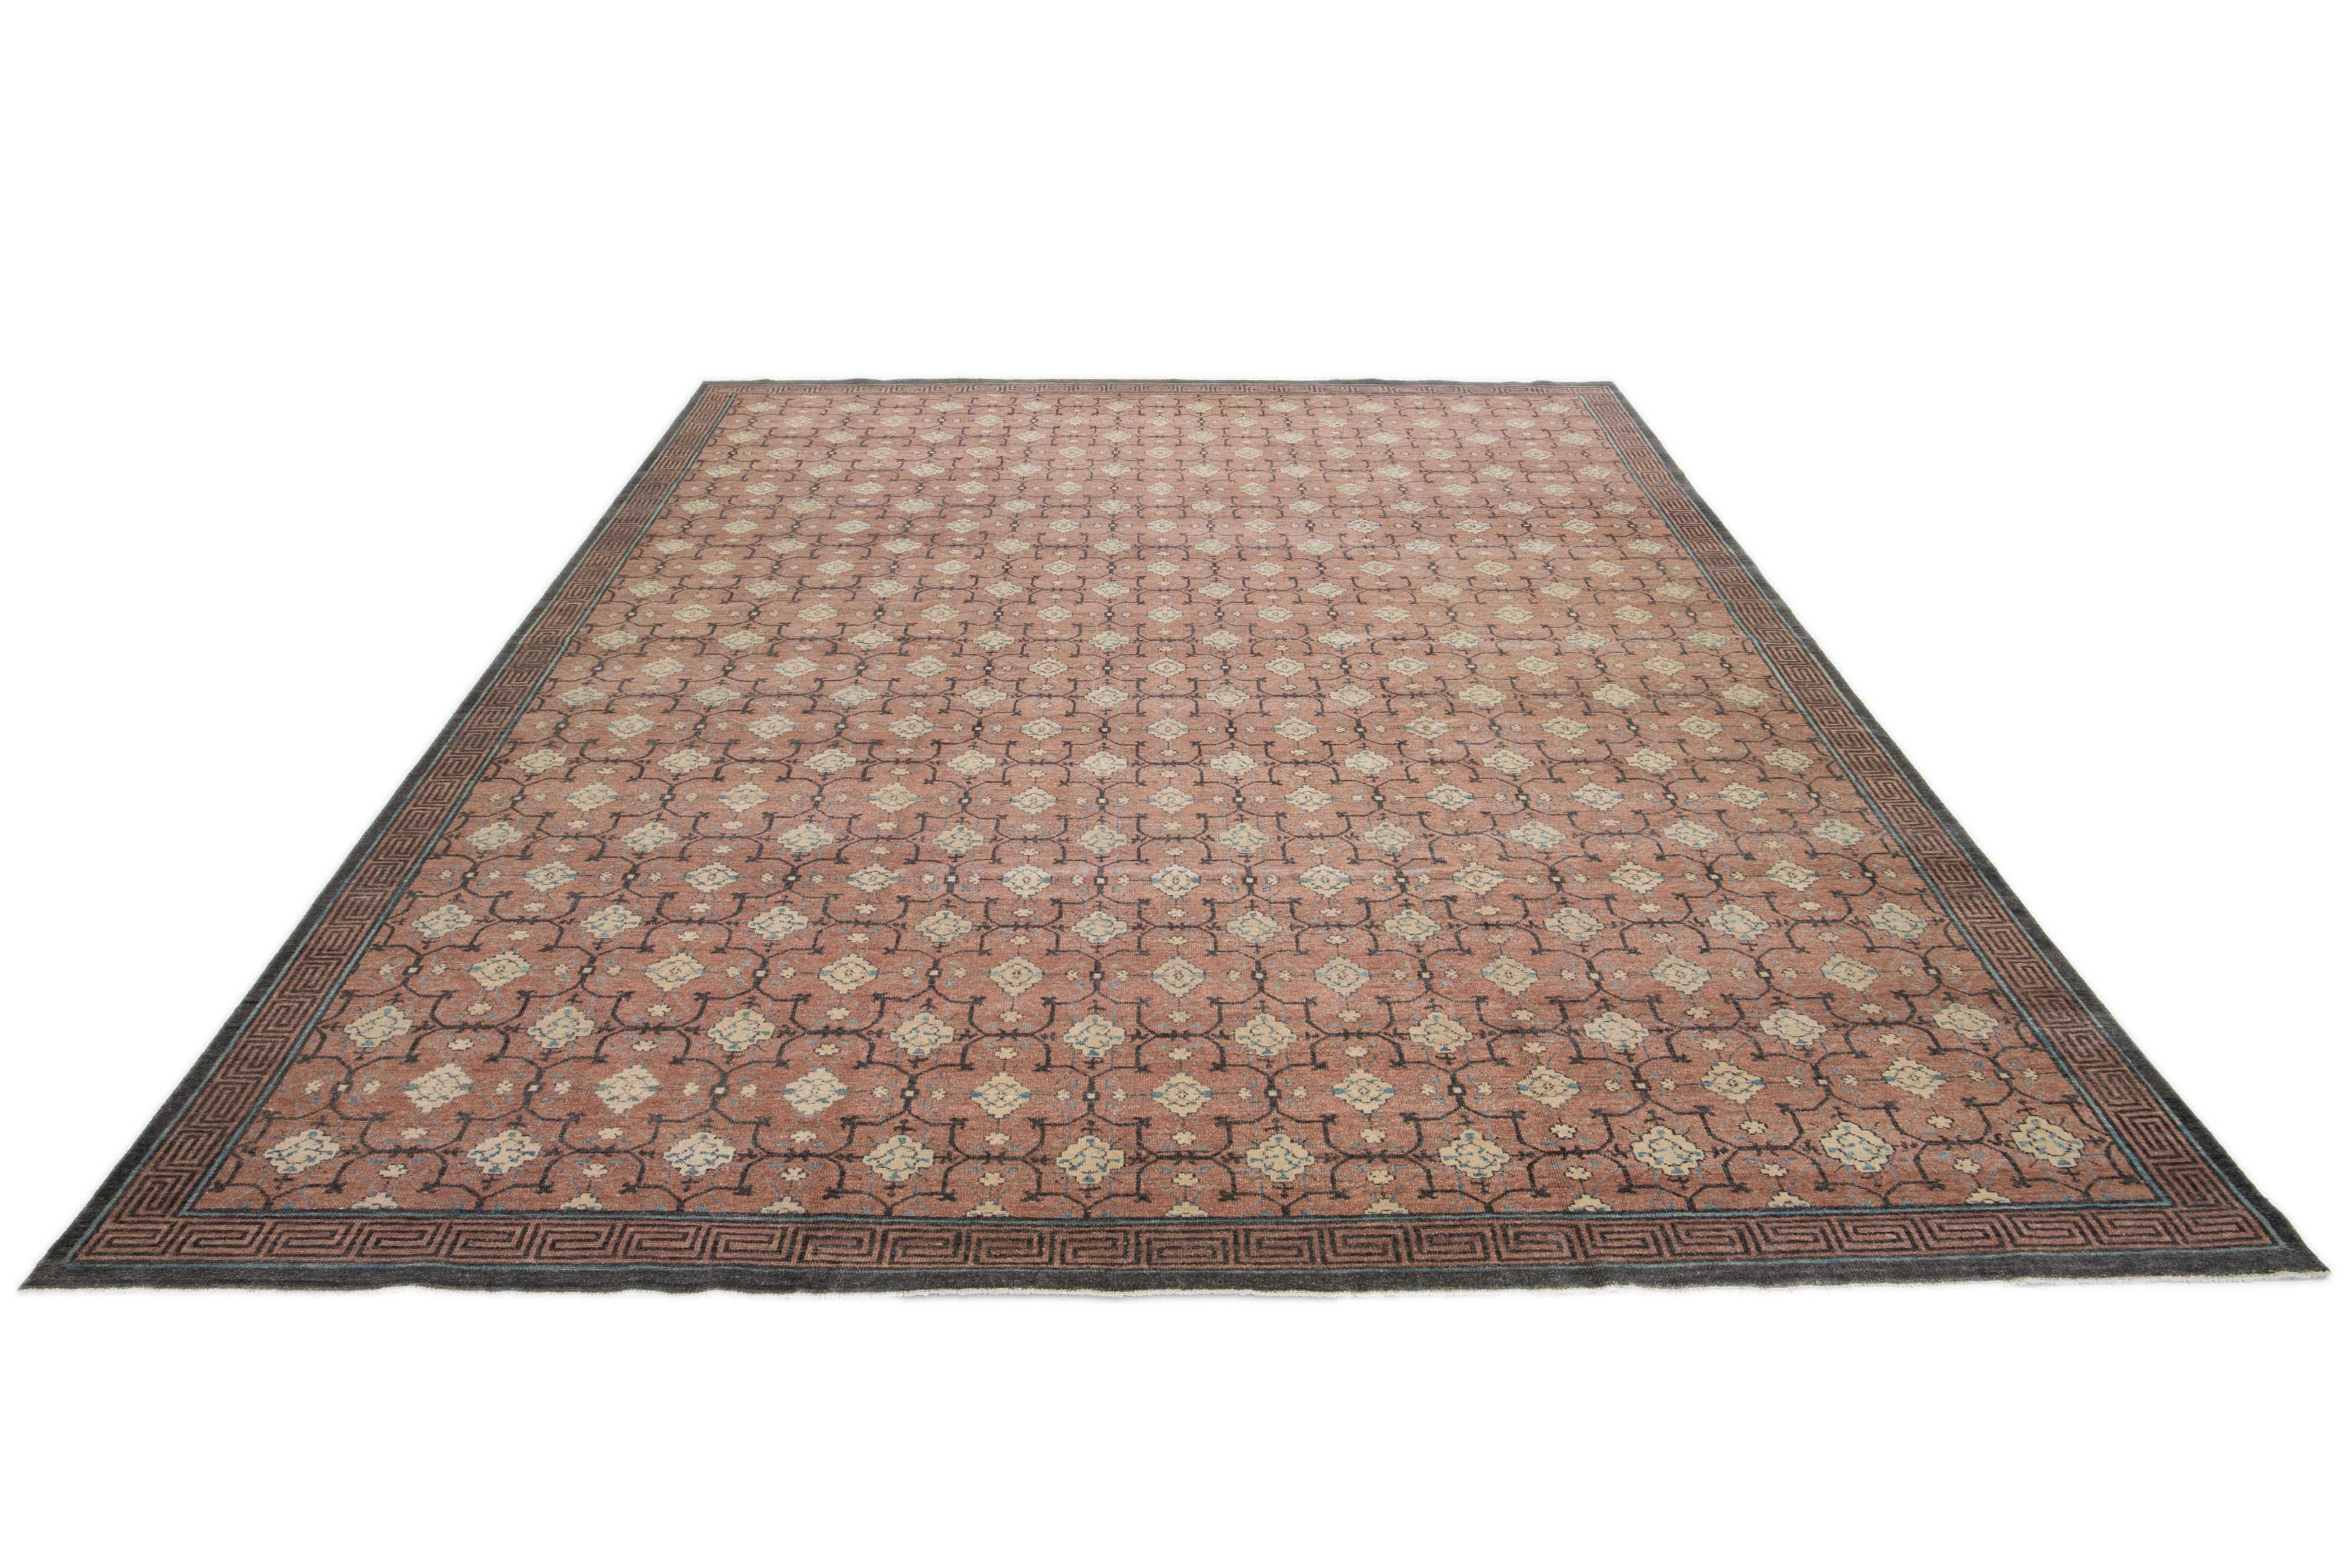 A Khotan wool rug In a peach-brown color field with interconnected rosette designs. This hand-knotted modern piece has beige and gray accents that complement the design.

This rug measures 11'11